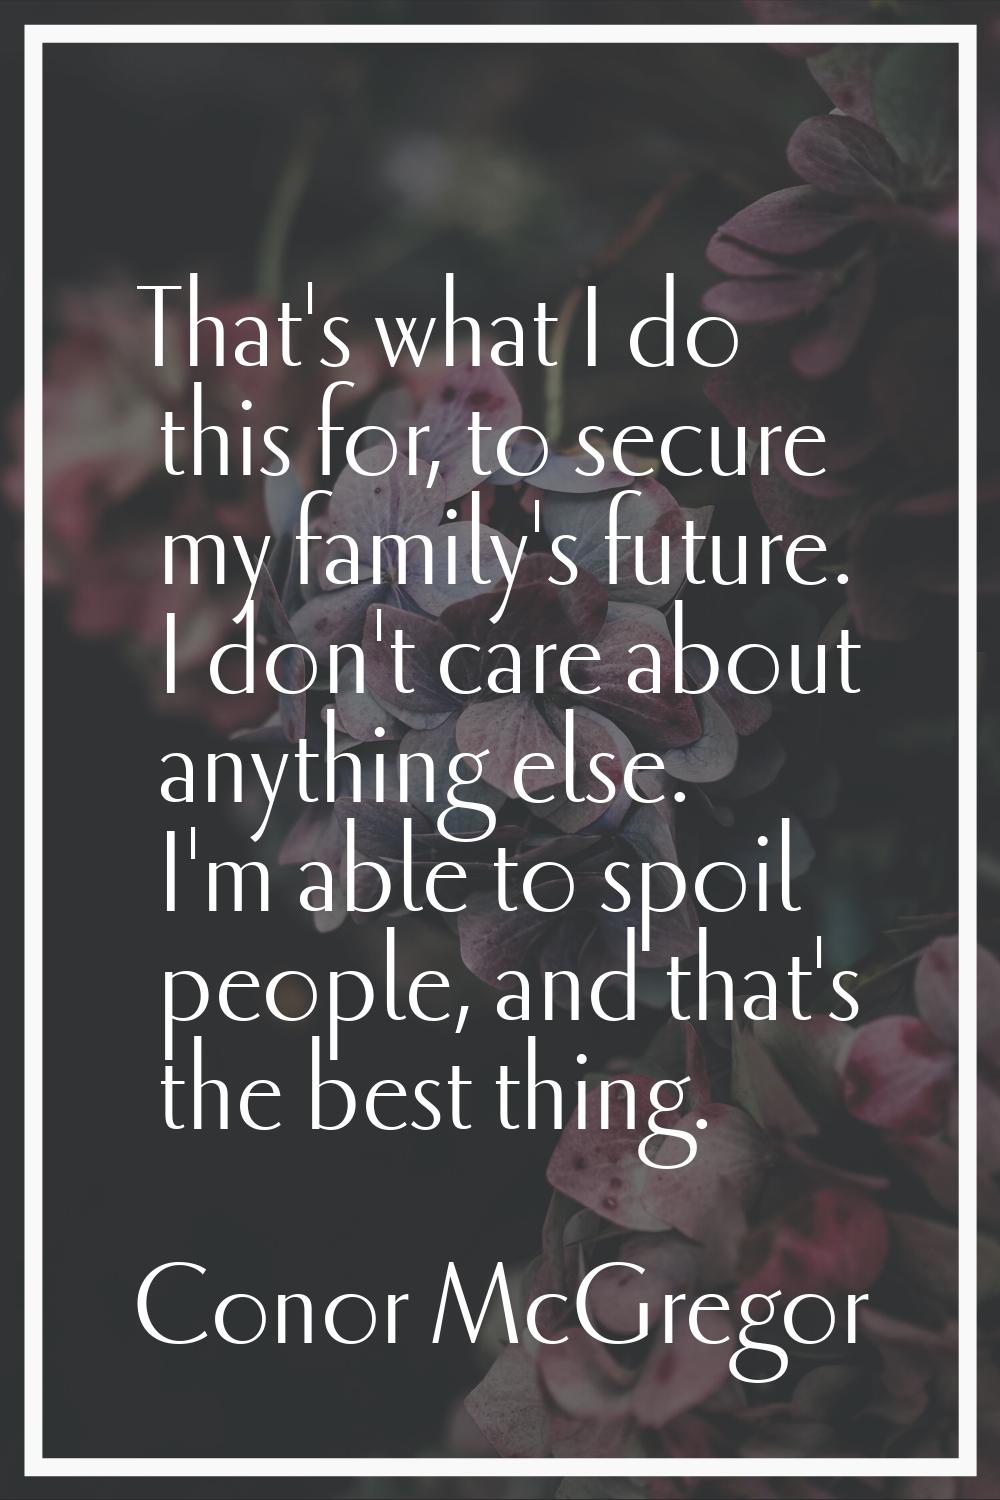 That's what I do this for, to secure my family's future. I don't care about anything else. I'm able